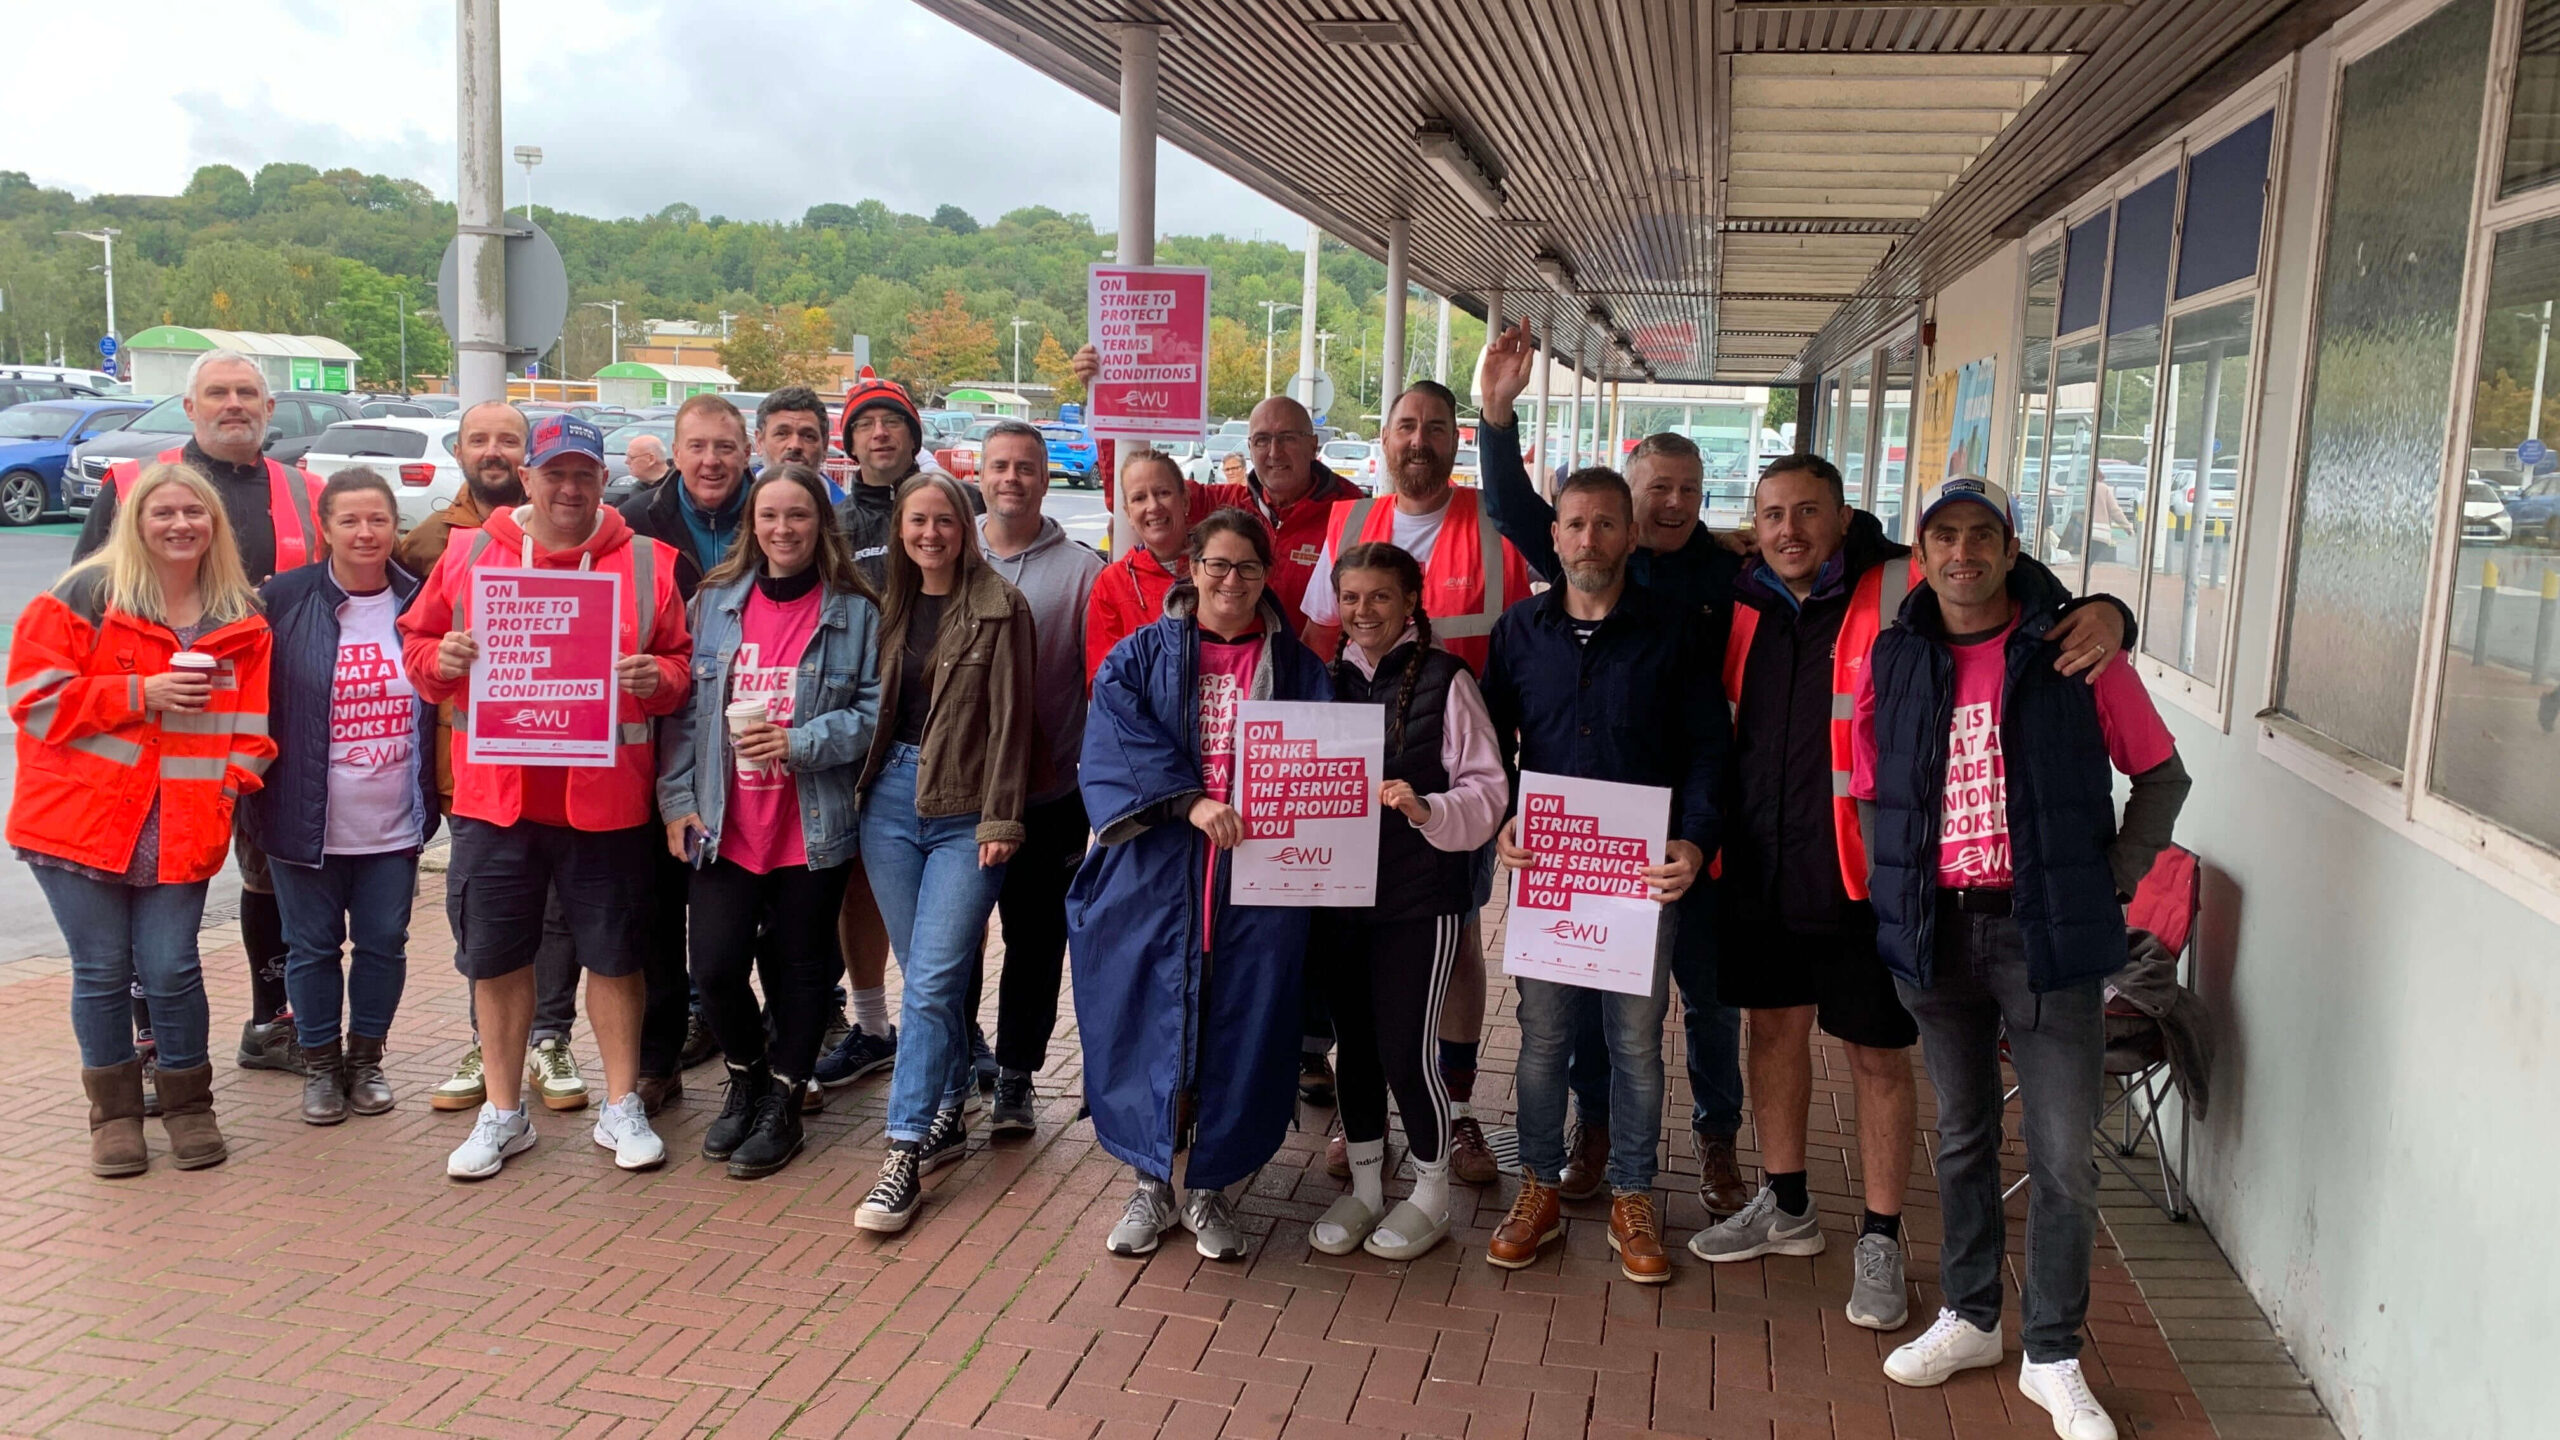 royal mail workers on a picket line